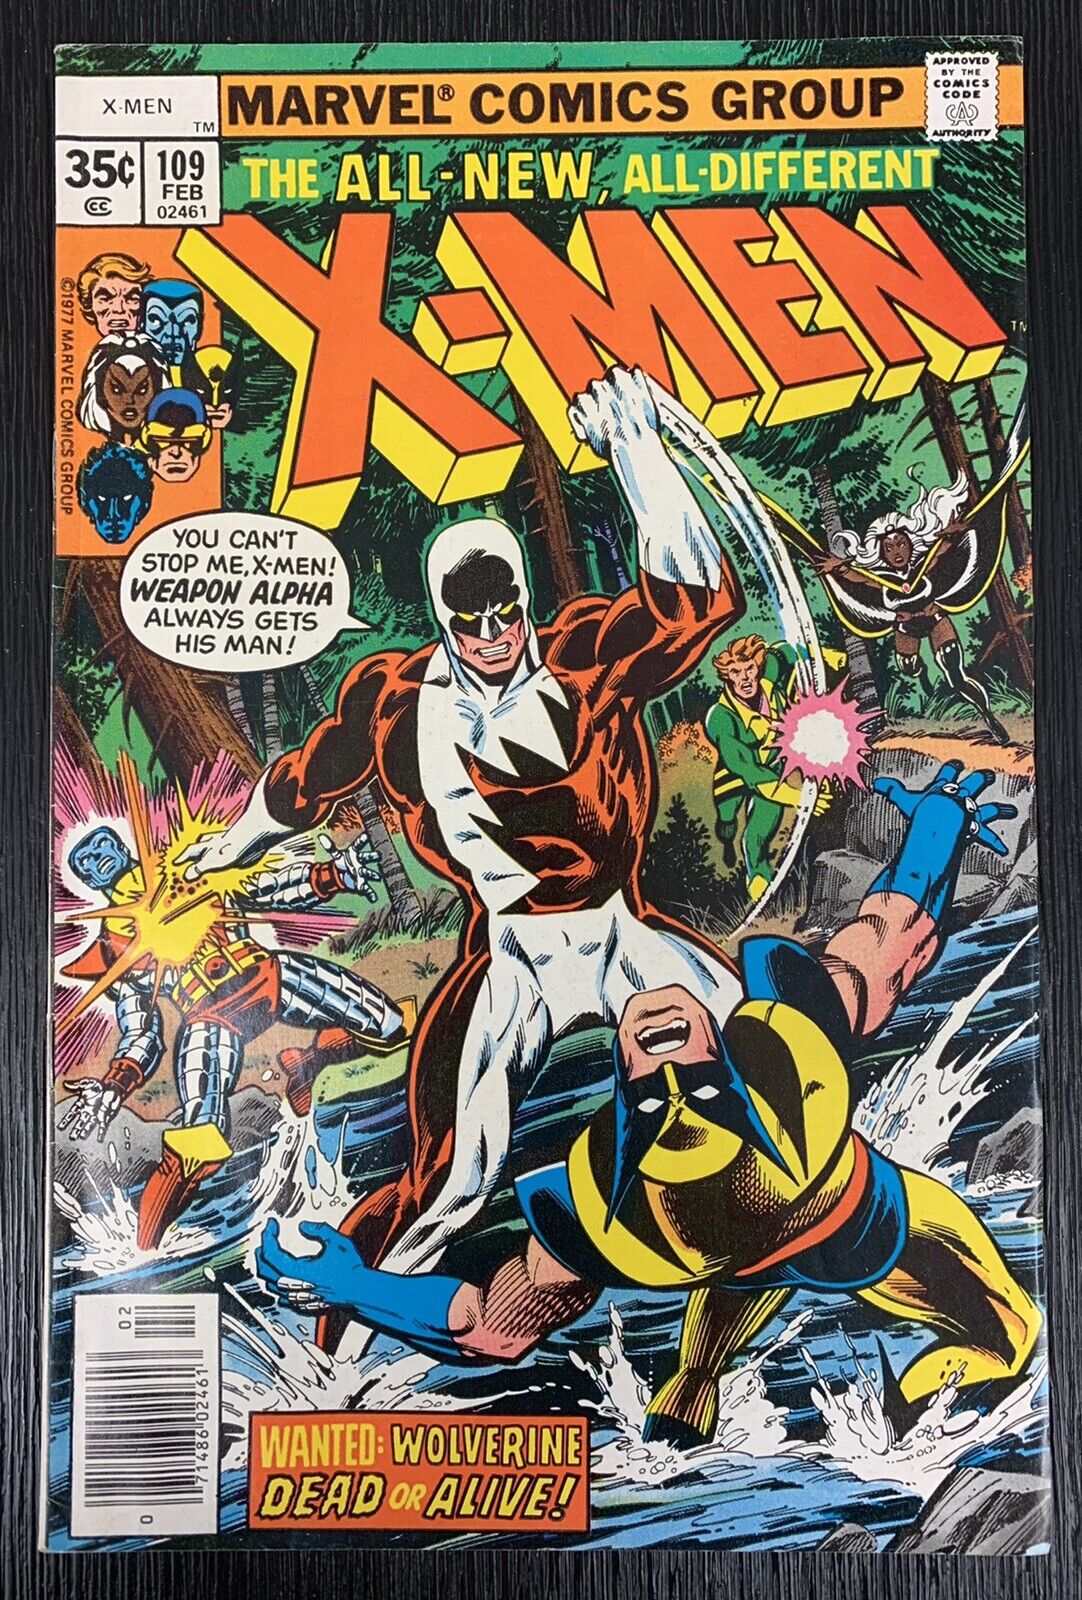 1977 MARVEL COMICS THE ALL-NEW, ALL-DIFFERENT X-MEN #109 